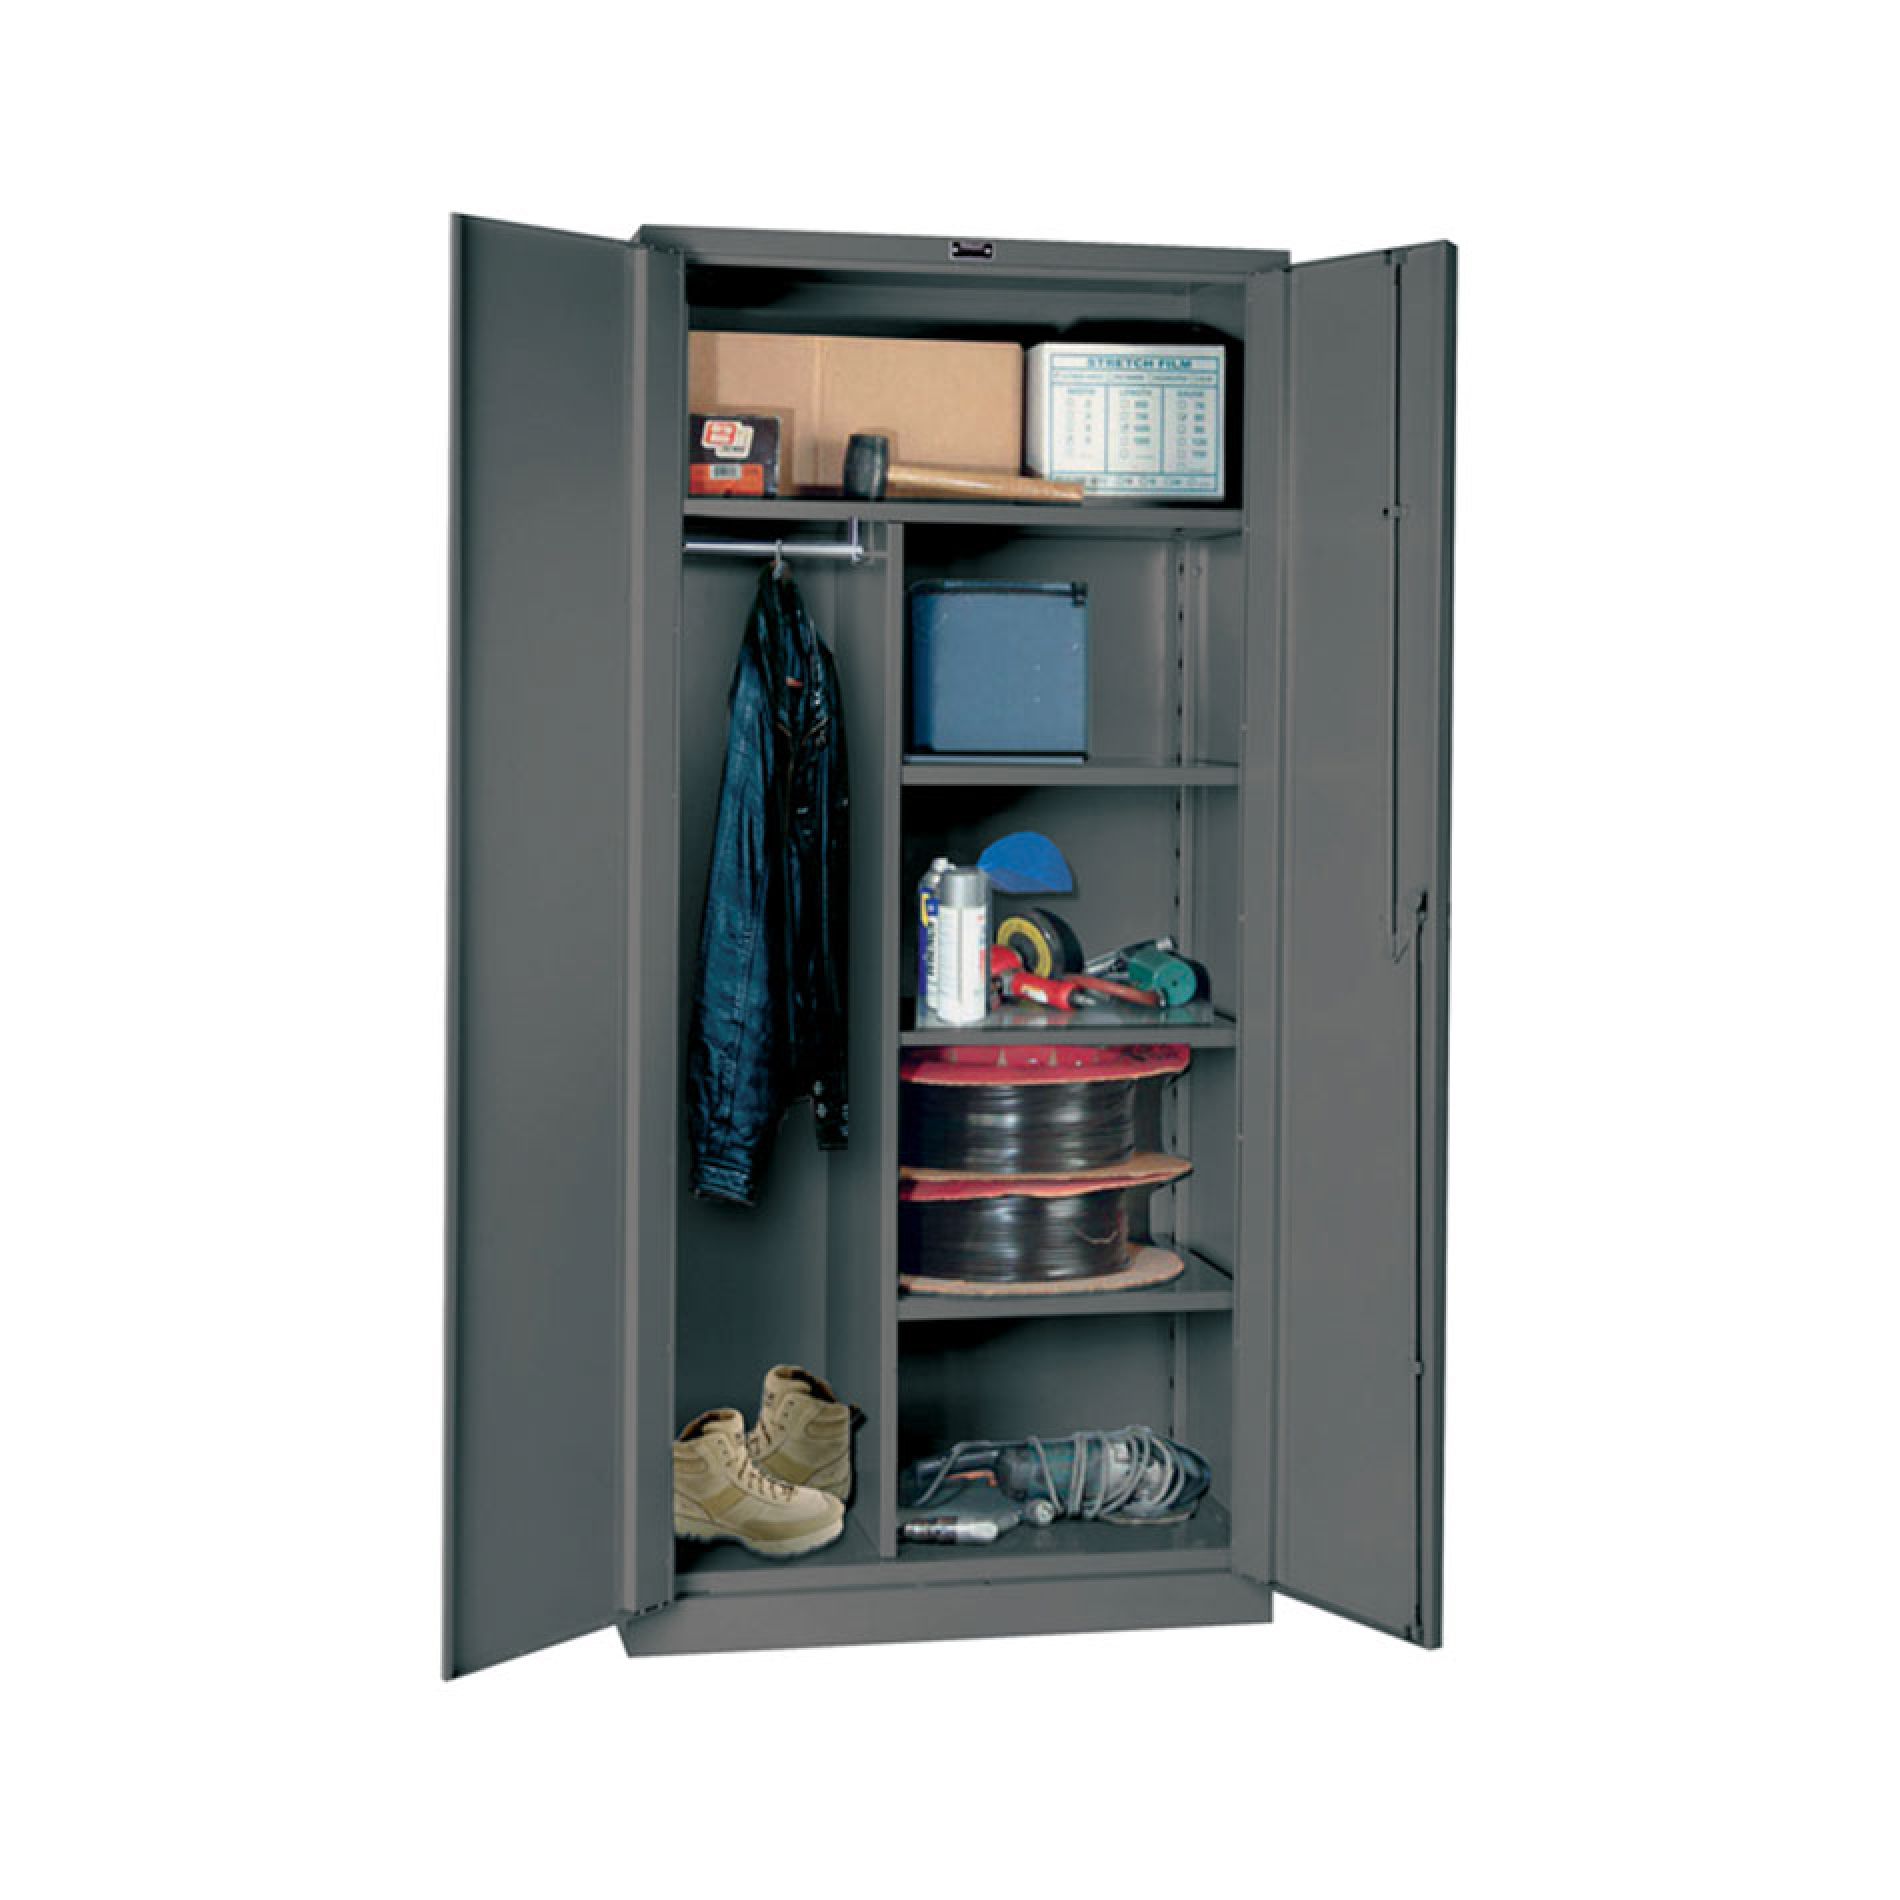 DuraTough All-Welded Steel Cabinets